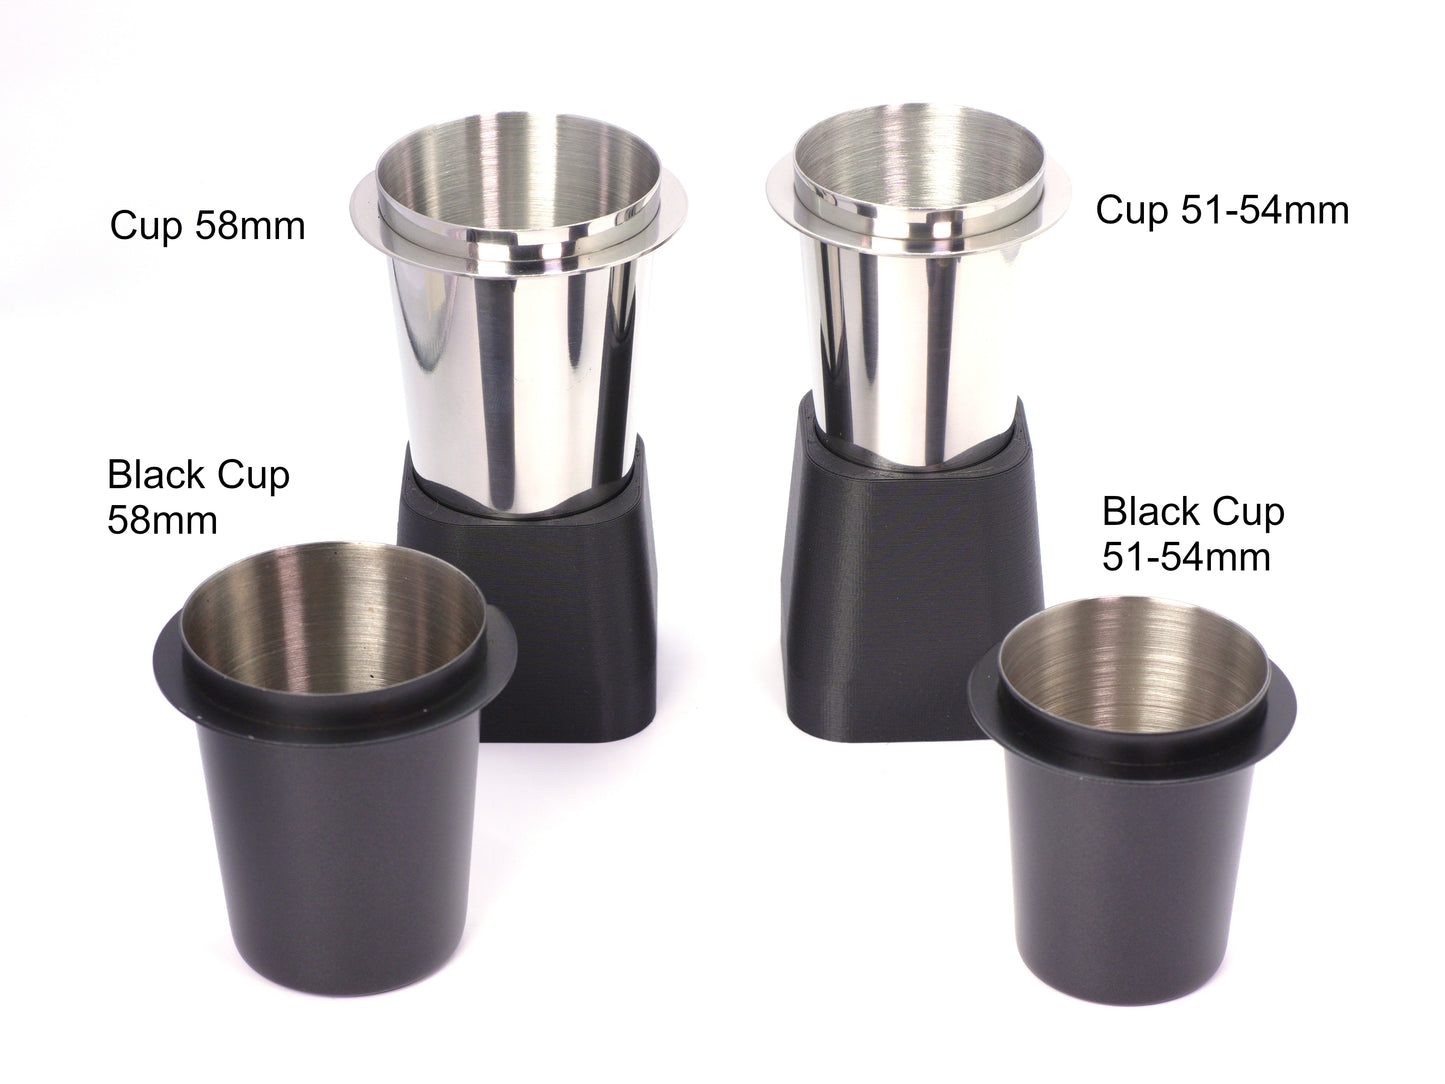 Eureka Mignon Set with Tilted Base | Magnetic Front Tray | Metallic Dosing Cup and Stand | Low Retention Kit | Reduced Coffee Spillage